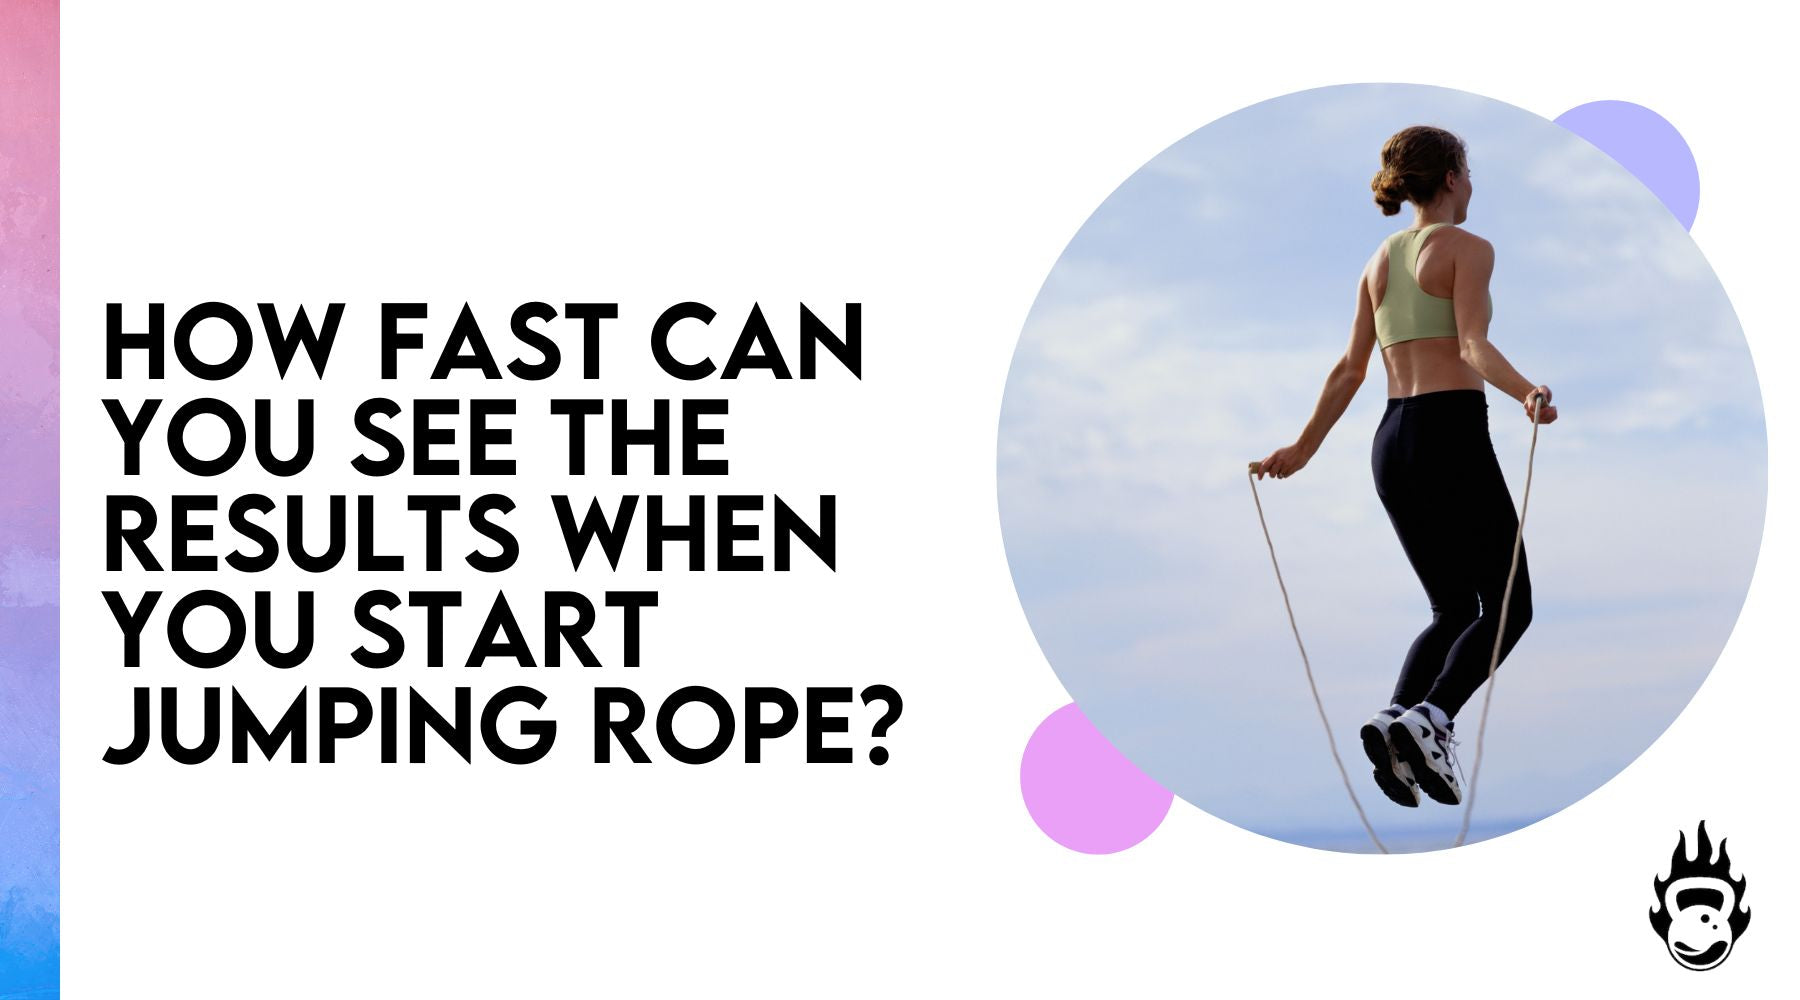 How fast can you see the results when you start jumping rope